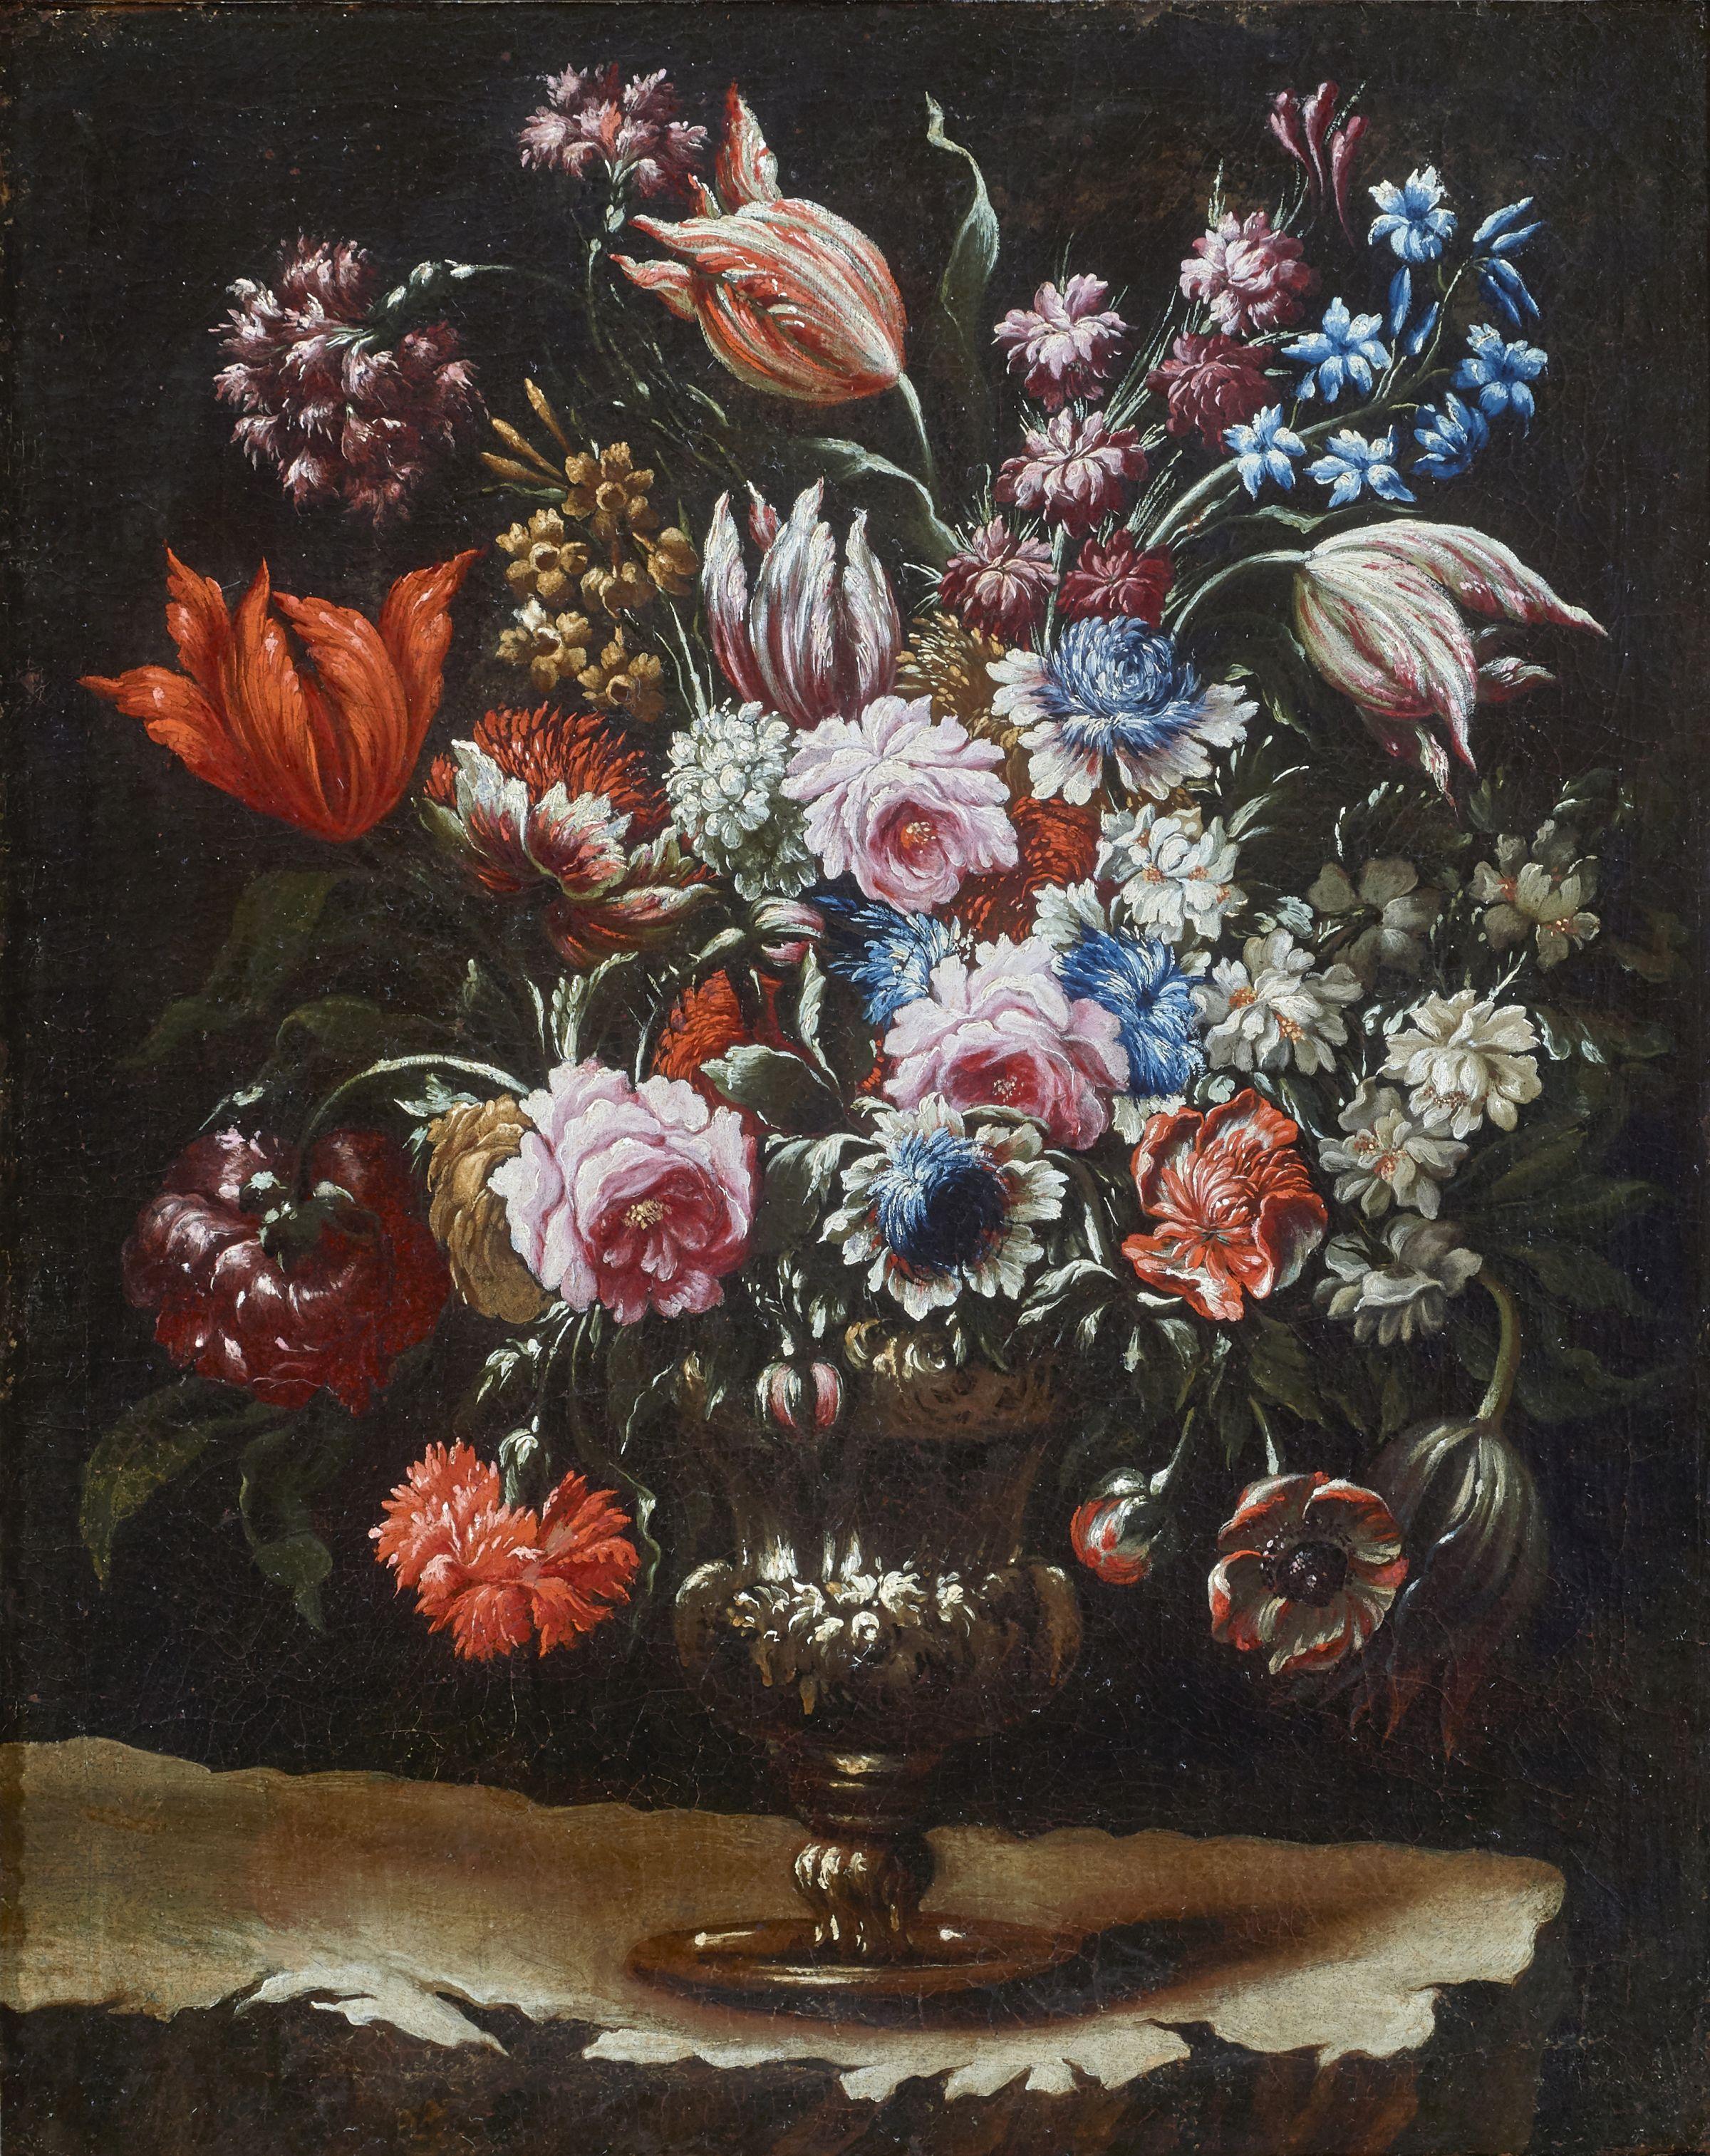 Painting oil on canvas measuring 63 x 47 cm without frame and 80 64 cm with frame depicting a vase of flowers by the painter Tommaso Realfonso (Naples 1677 - 1748). 

In this vase of flowers the luxuriance of the florid and intricate bouquet, full